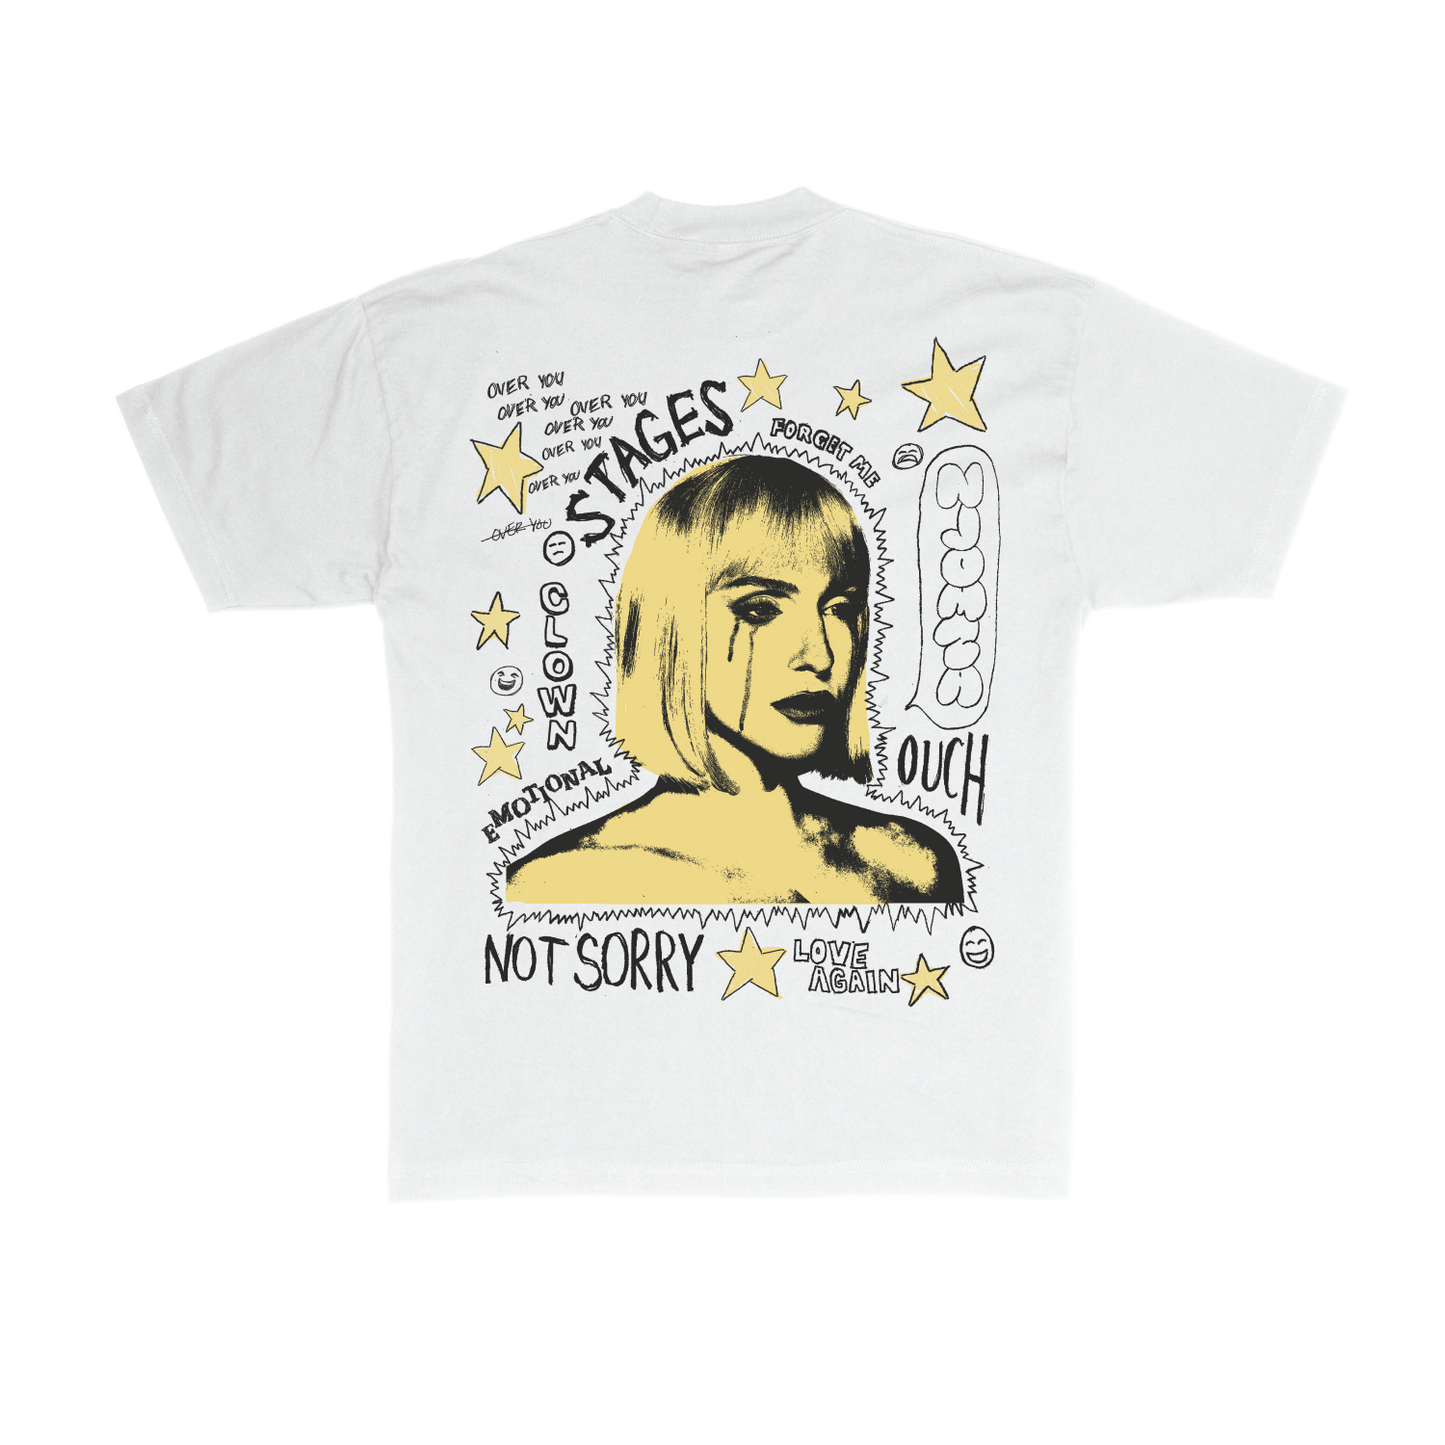 NJOMZA - Stages Collage Tee